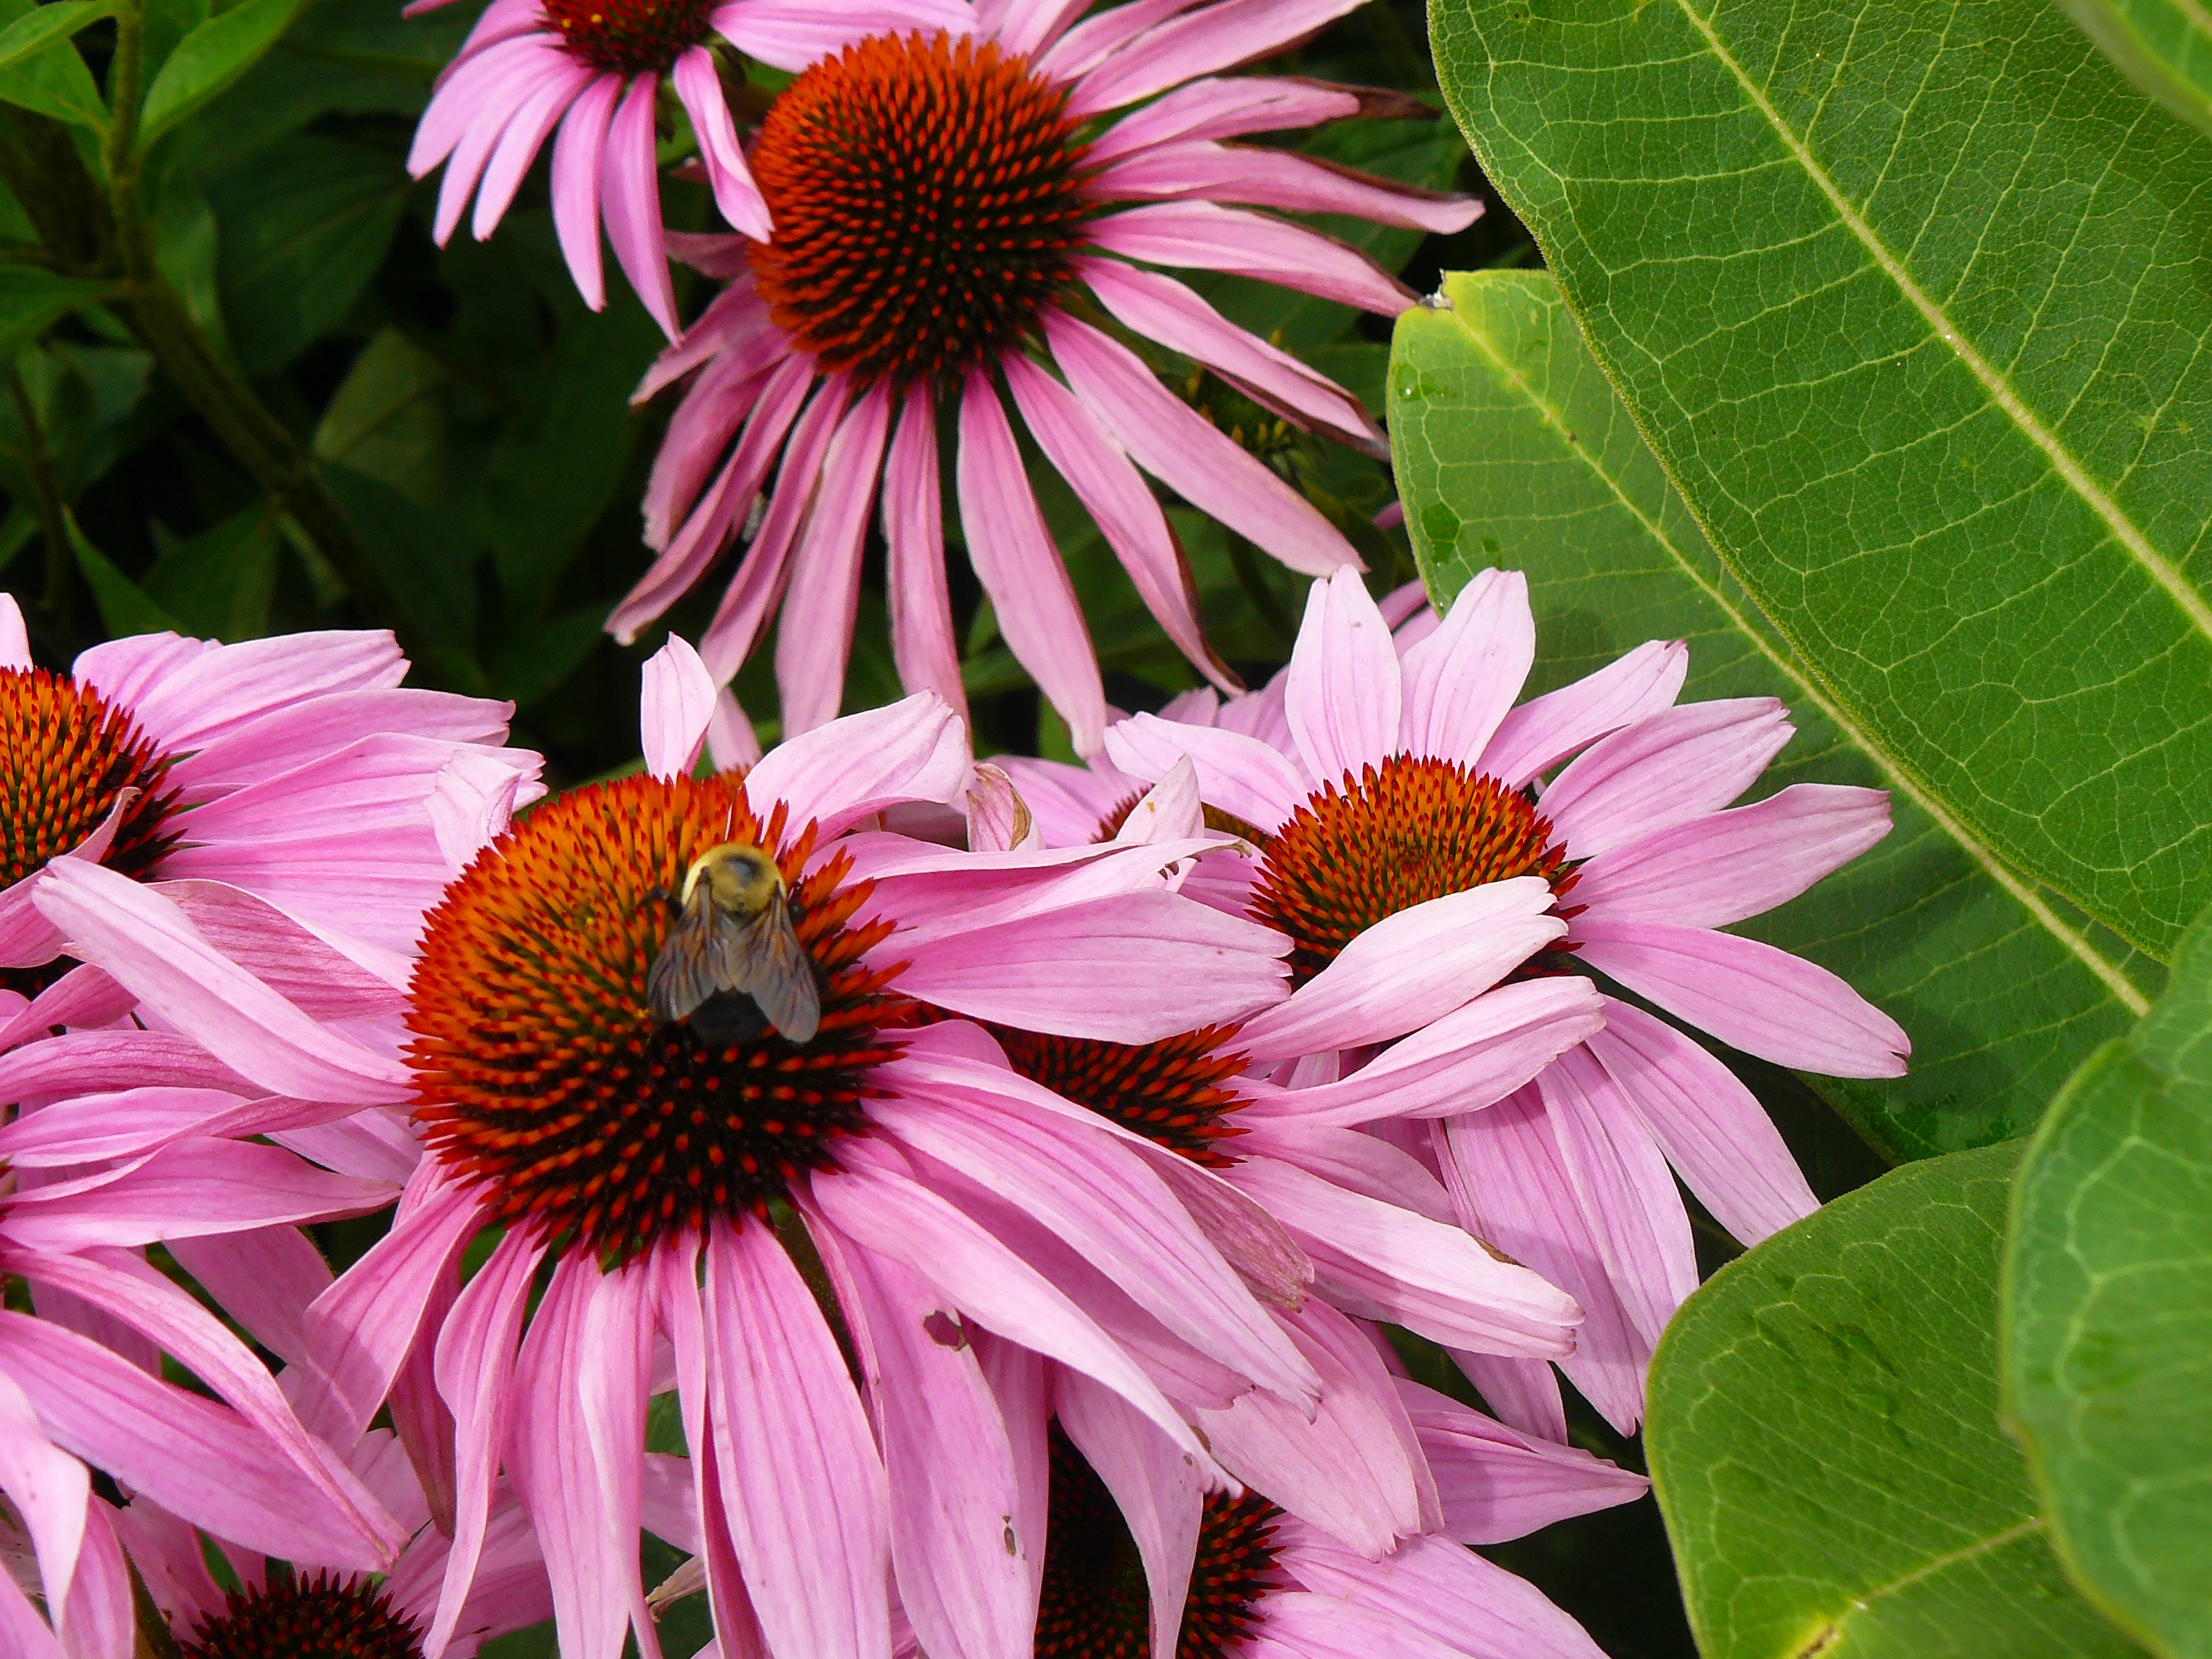 closeup of echinacea flowers with a bee on one of the flowers